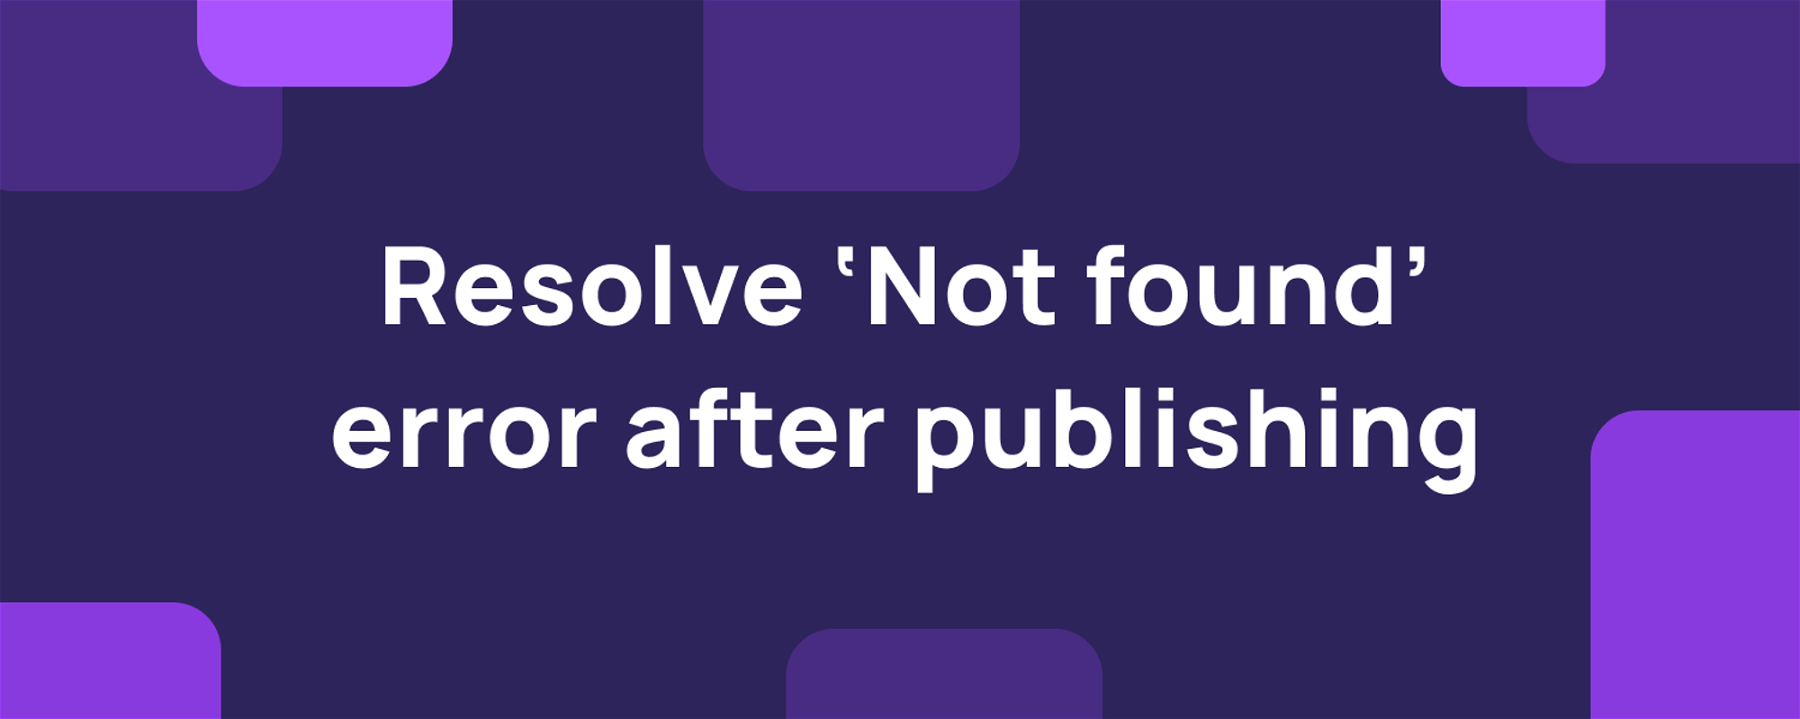 Resolve ’Not found’ error after publishing in Carrd 